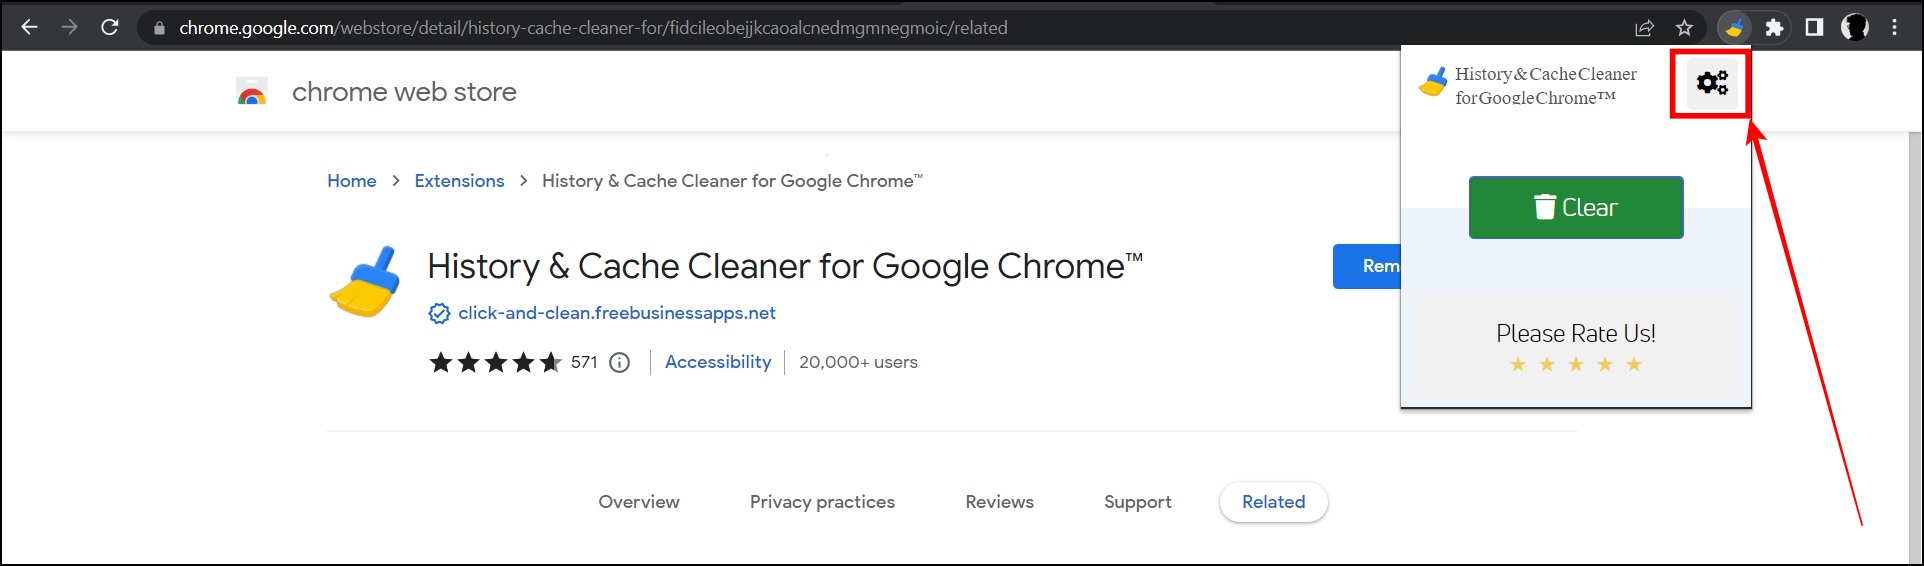 History & Cache Cleaner for Google Chrome Extension